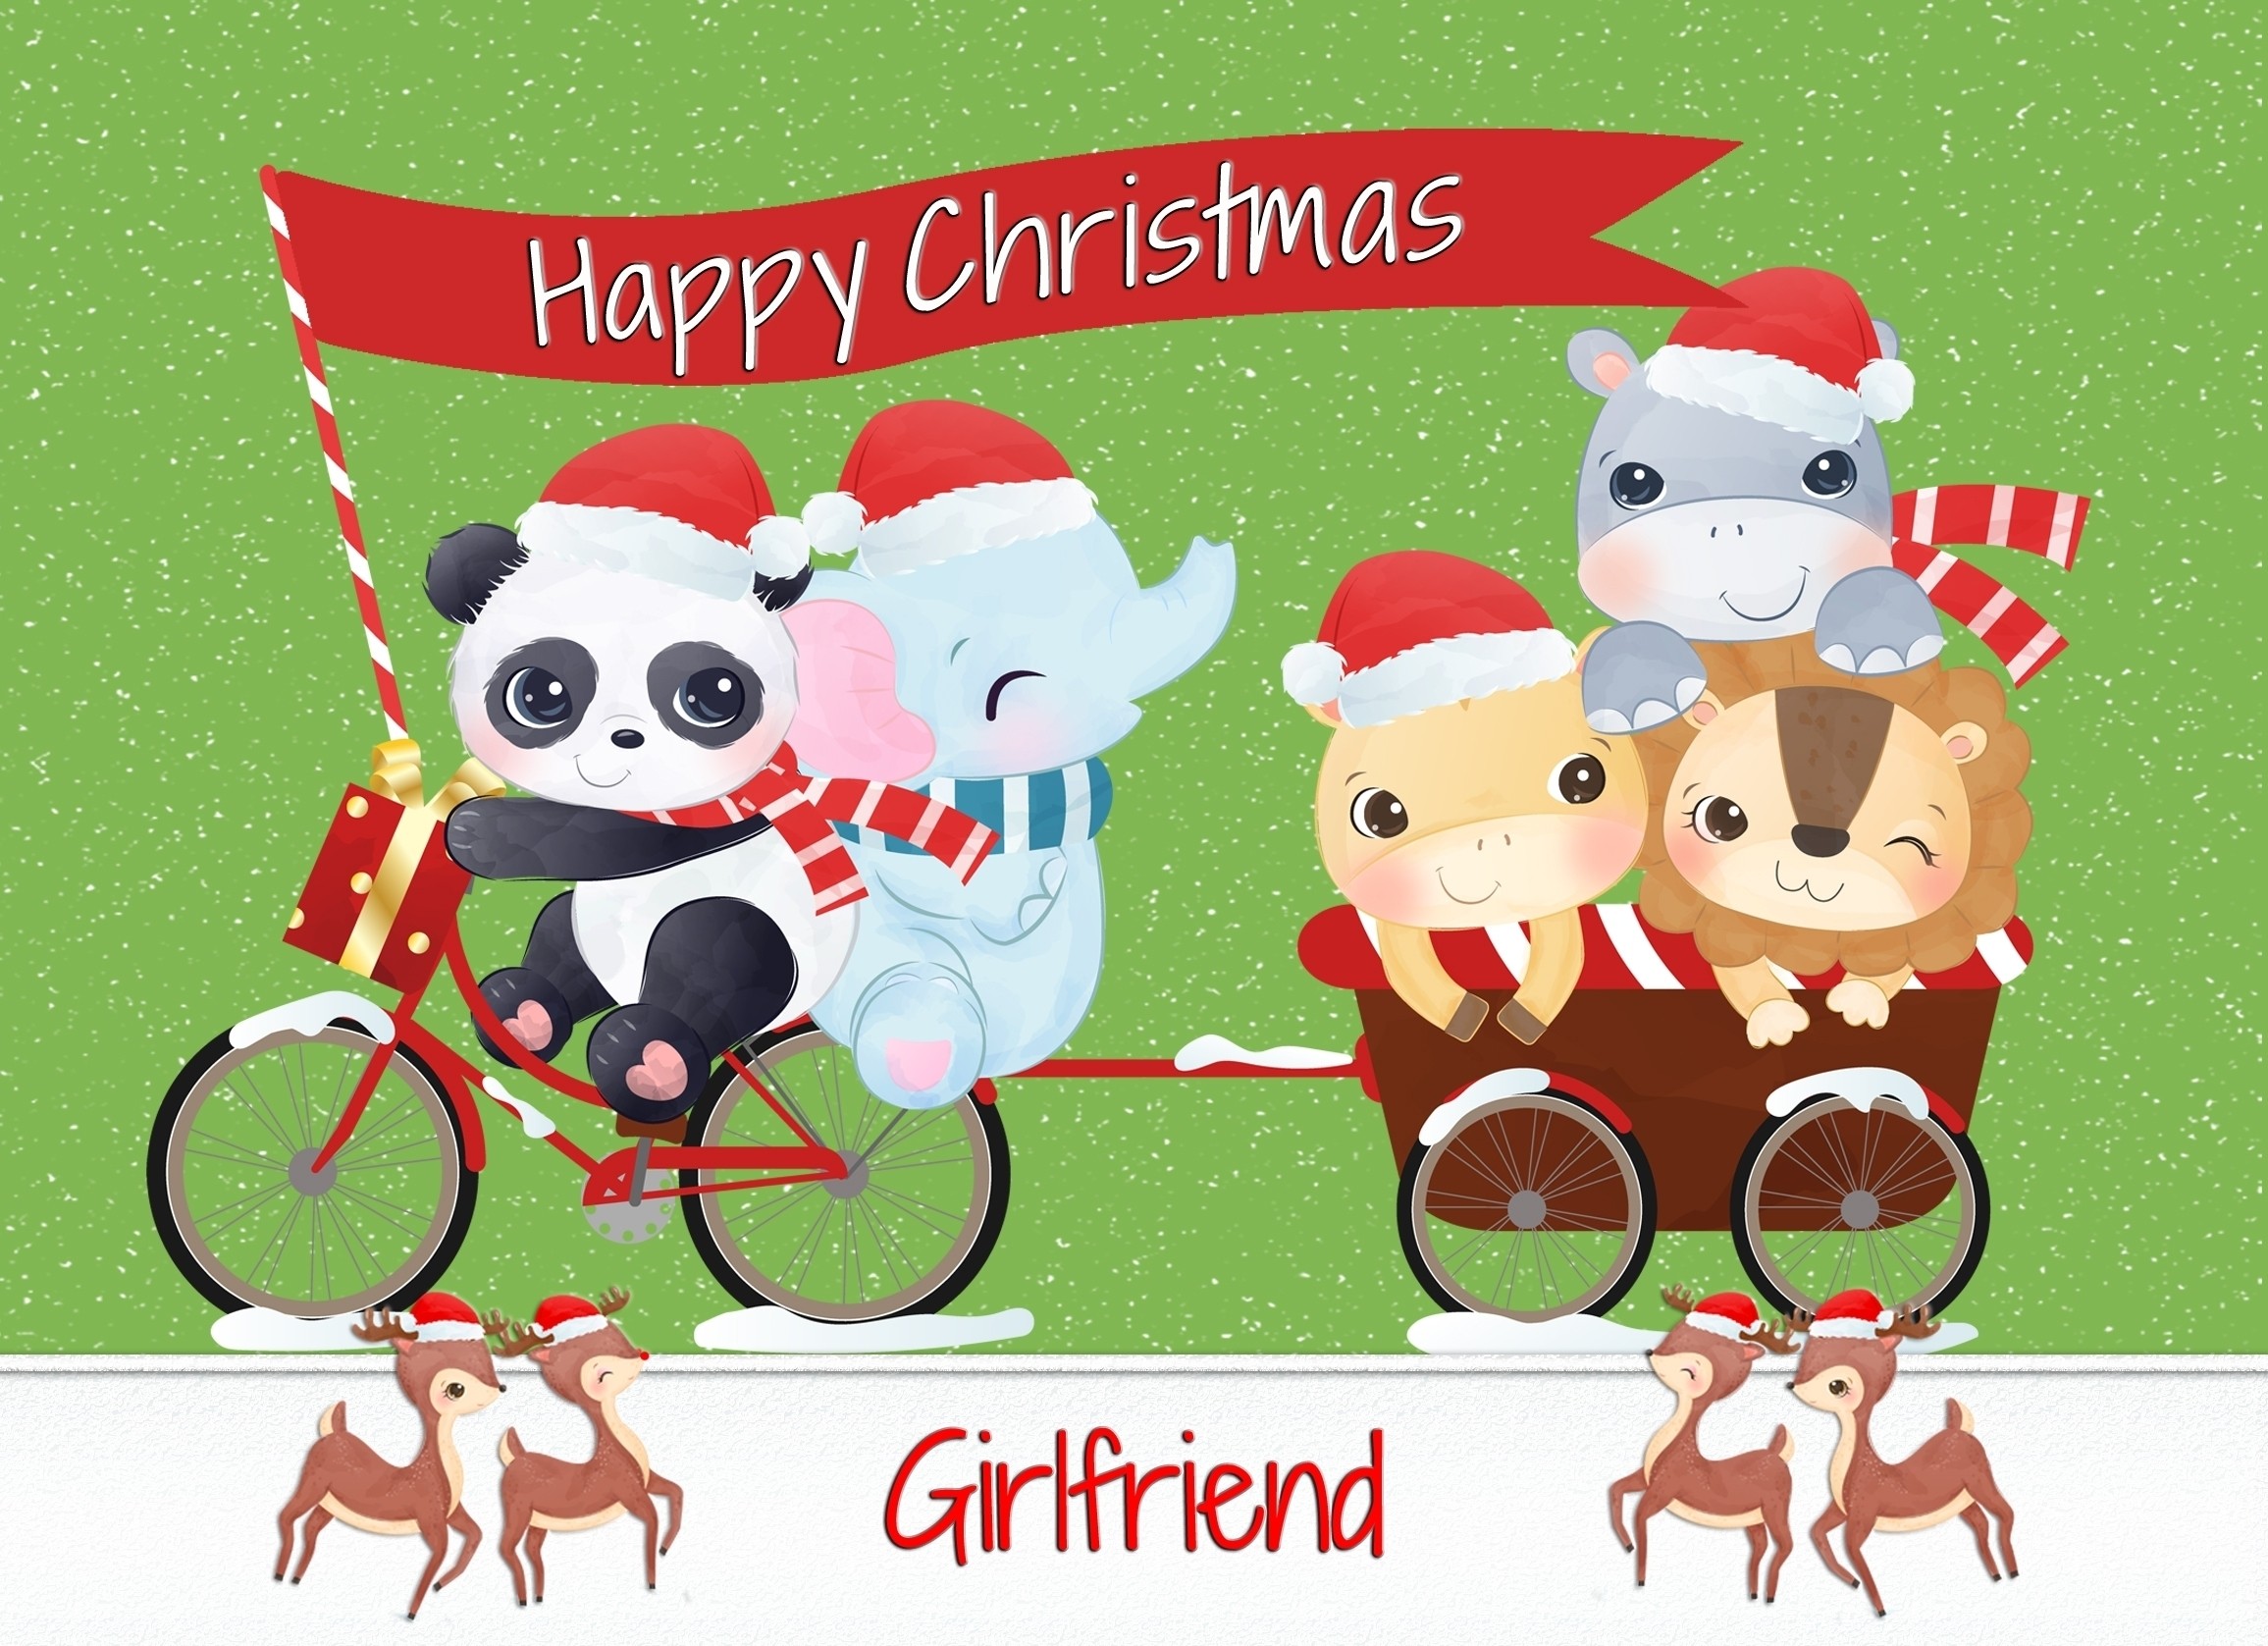 Christmas Card For Girlfriend (Green Animals)